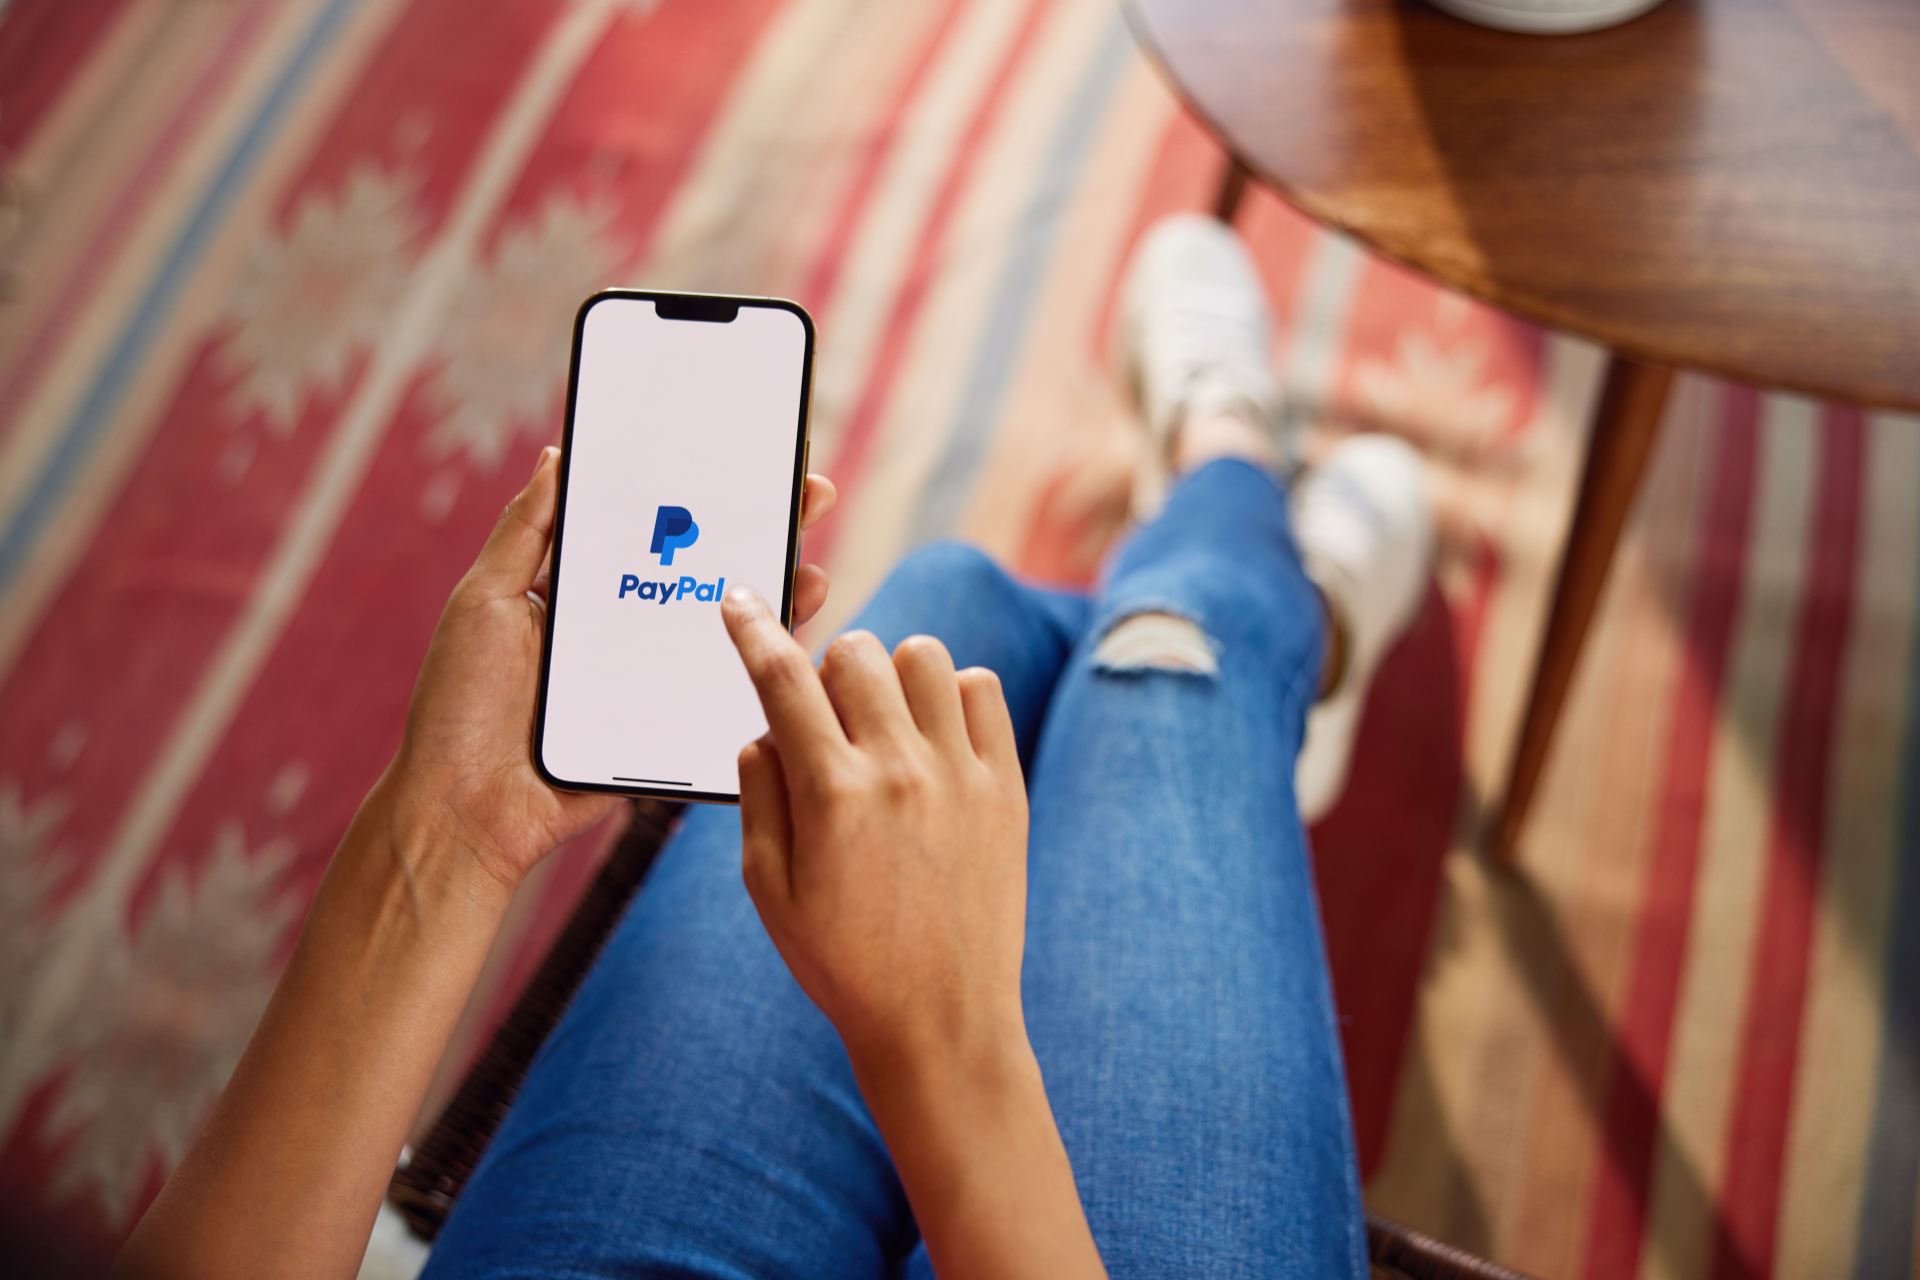 PayPal Apple Pay Integration Added - PayPal Enables Apple Pay Support for its Credit and Debit Cards BestCards